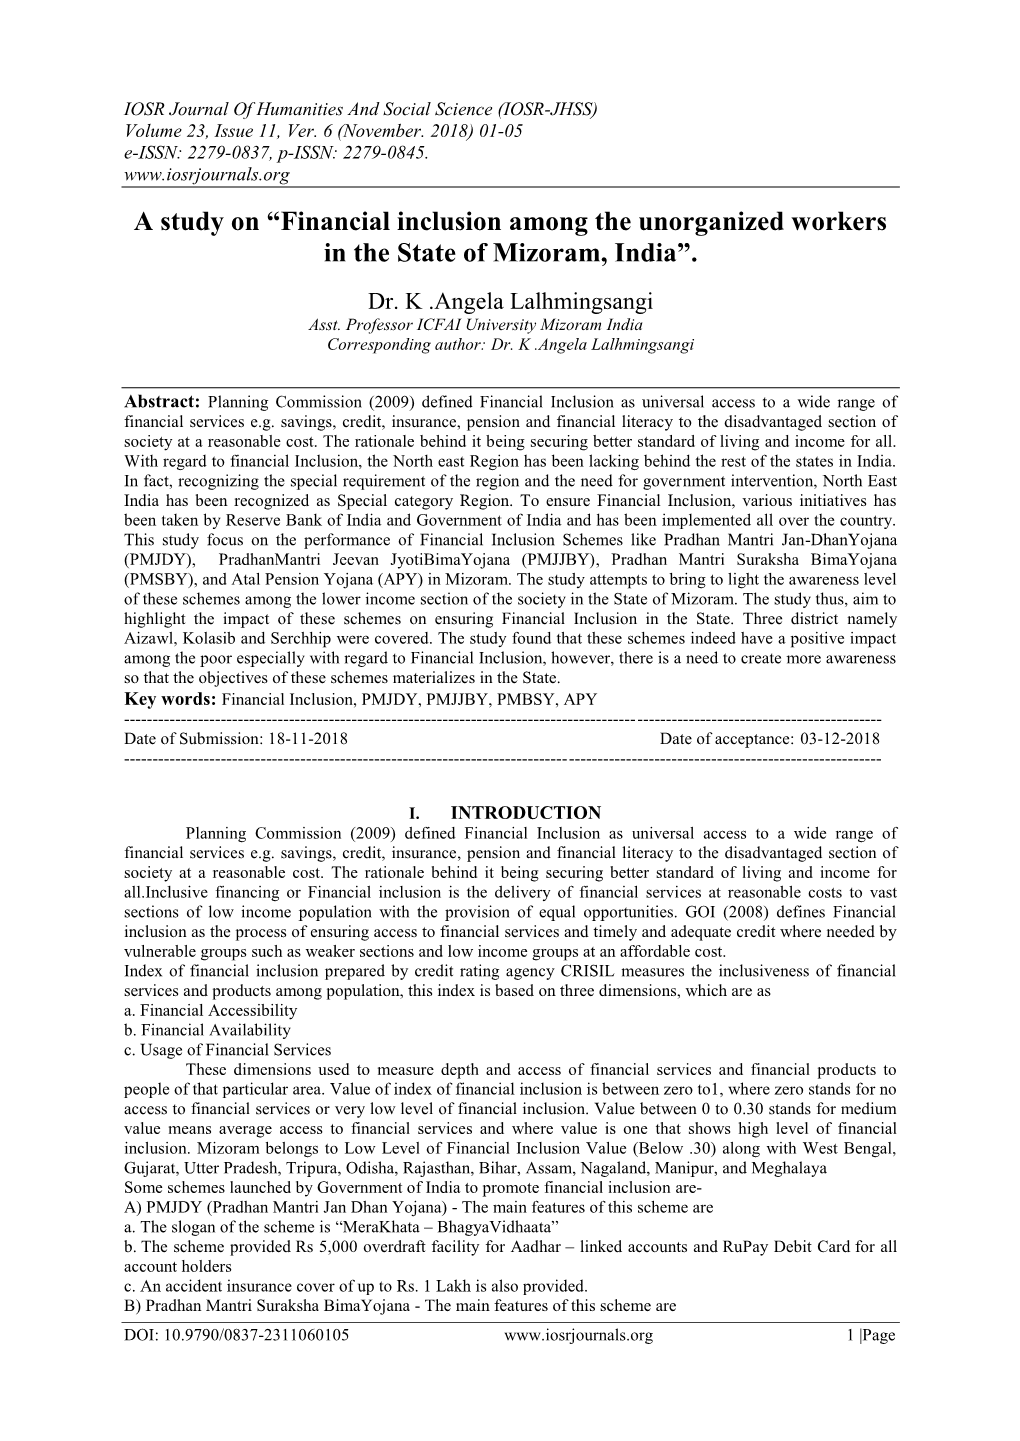 “Financial Inclusion Among the Unorganized Workers in the State of Mizoram, India”